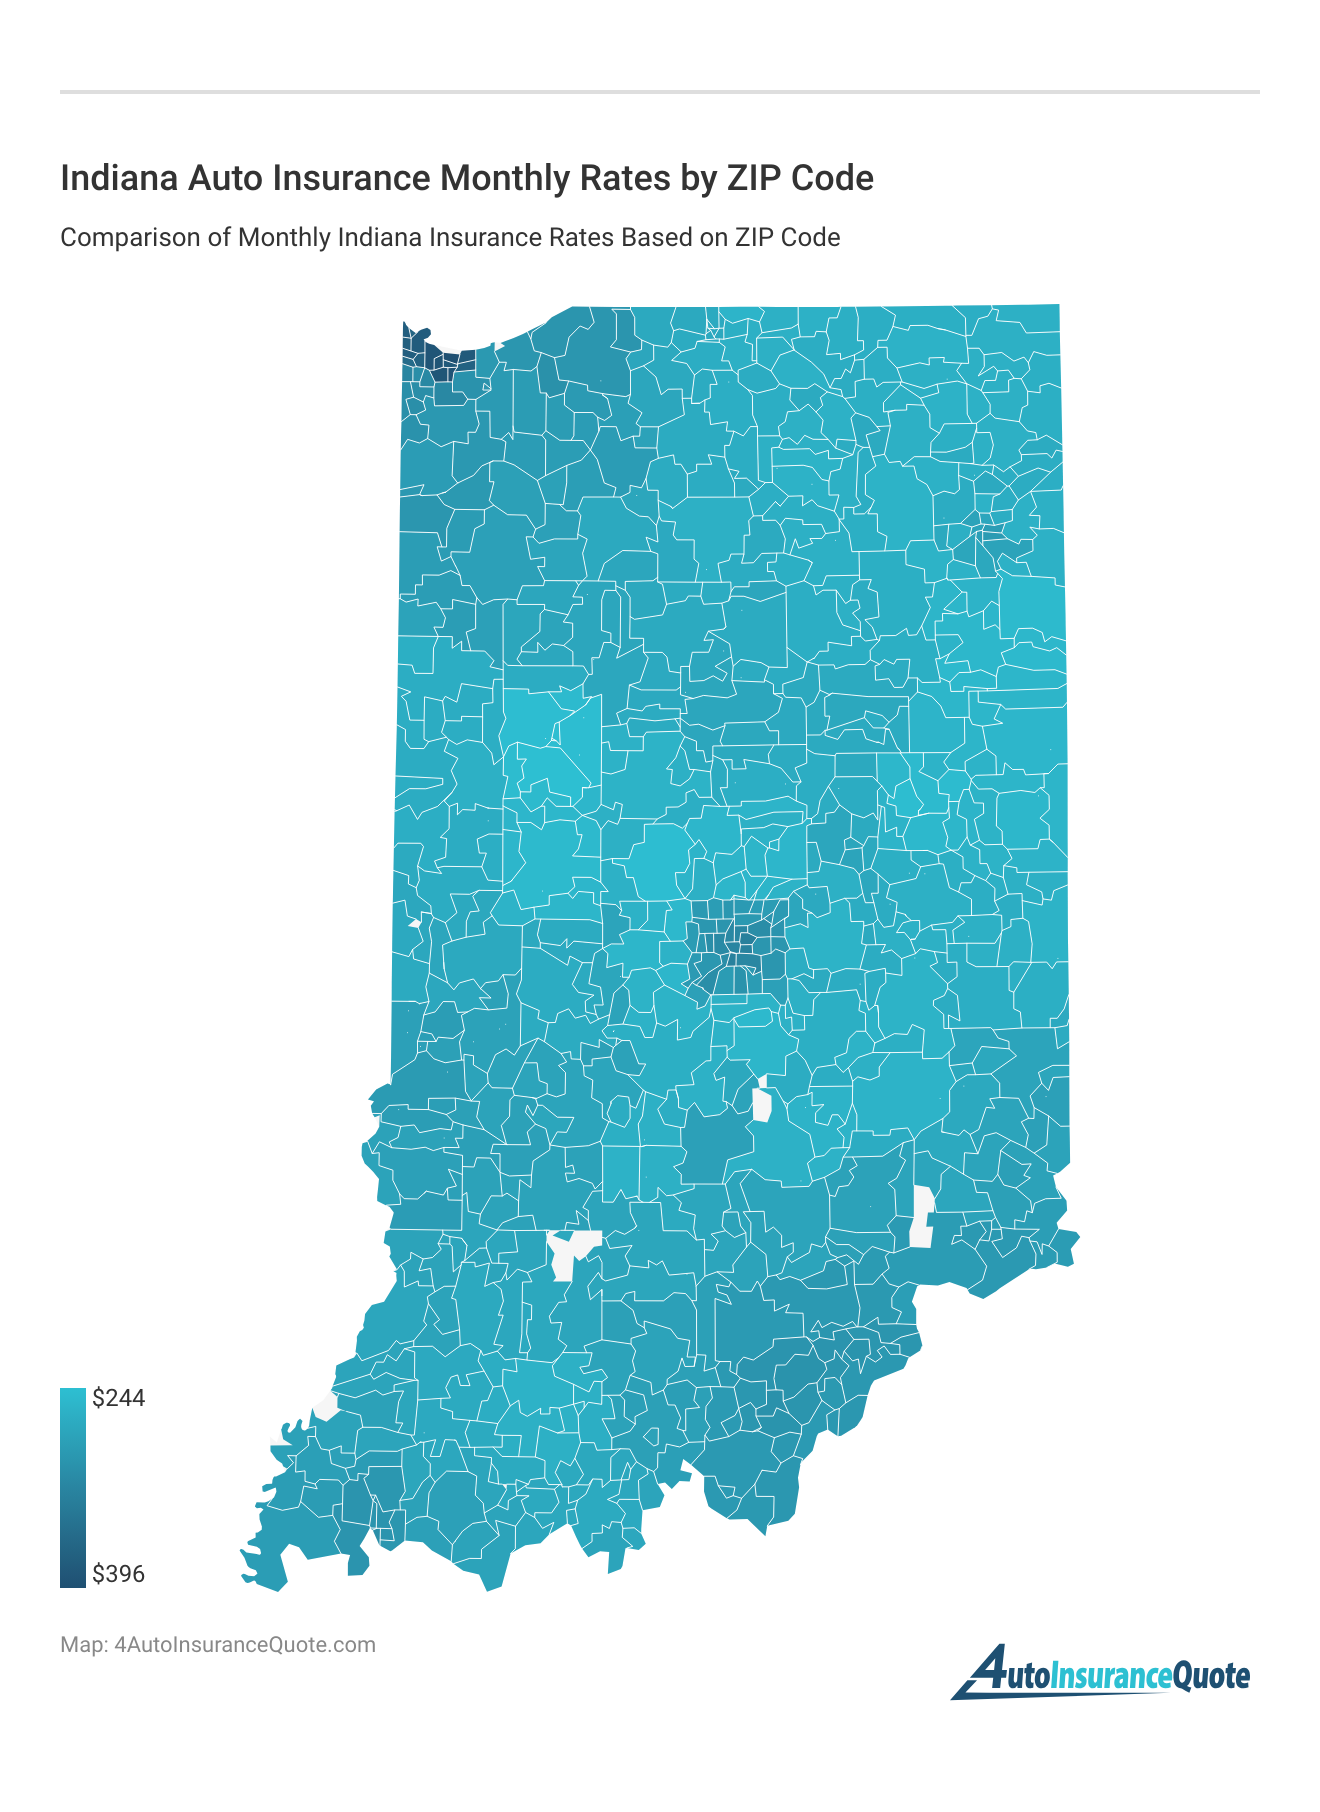 <h3>Indiana Auto Insurance Monthly Rates by ZIP Code</h3>